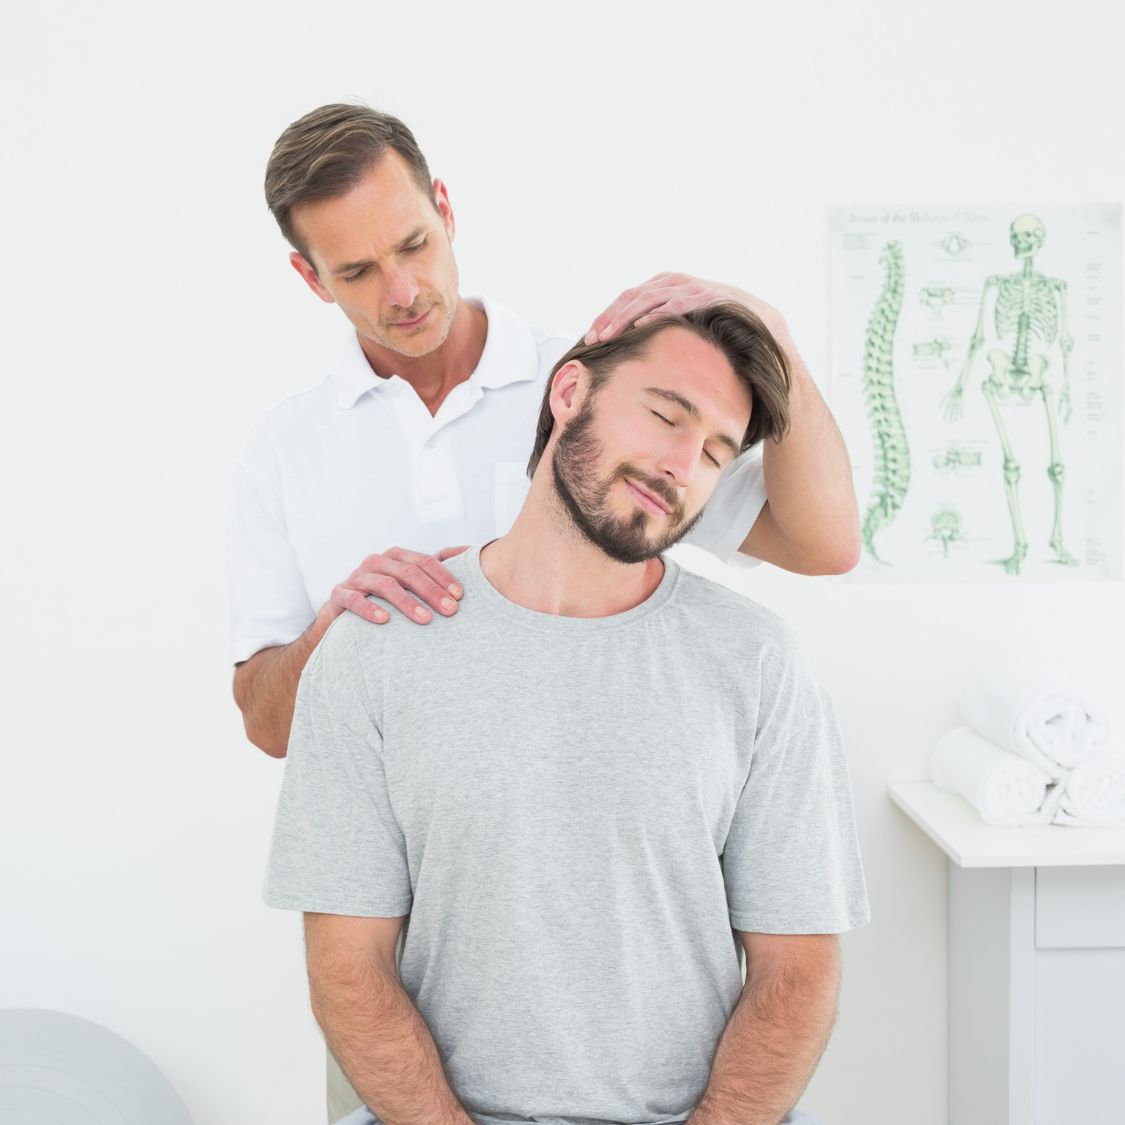 5 Reasons You Need To Schedule a Visit to the Chiropractor